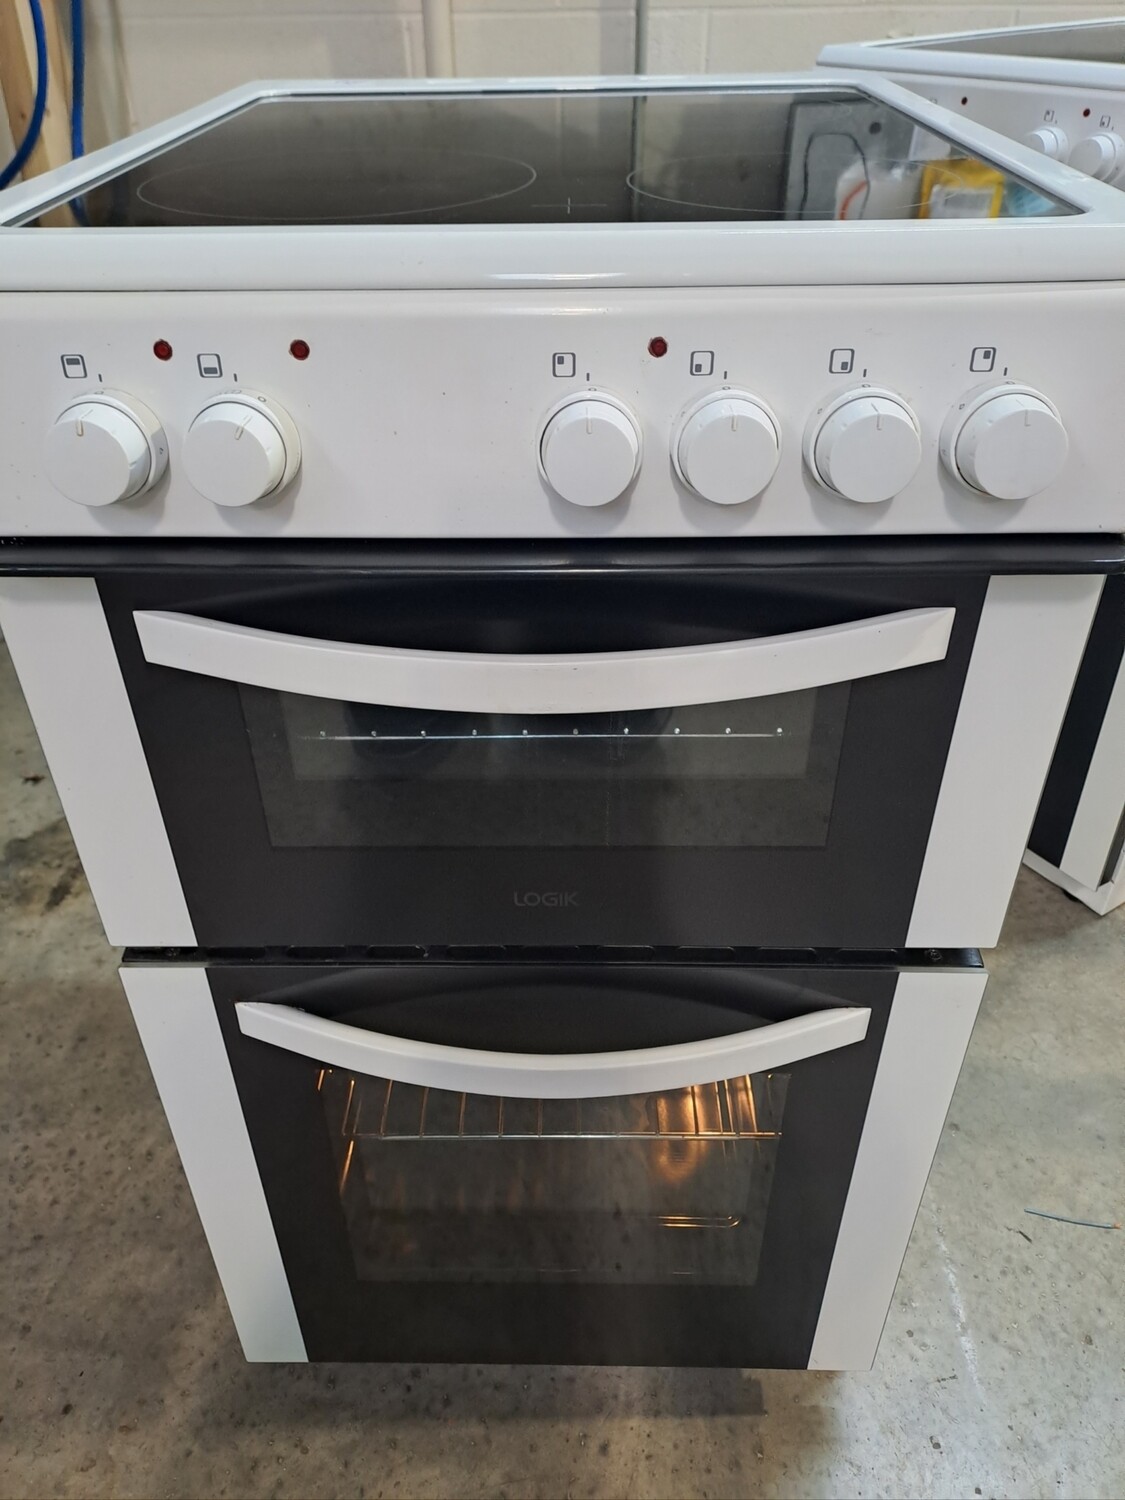 Logik LFTC50W16 50cm Electric cooker Twin Cavity White - Refurbished + 6 month guarantee. This item is located in our Whitby Road Shop 